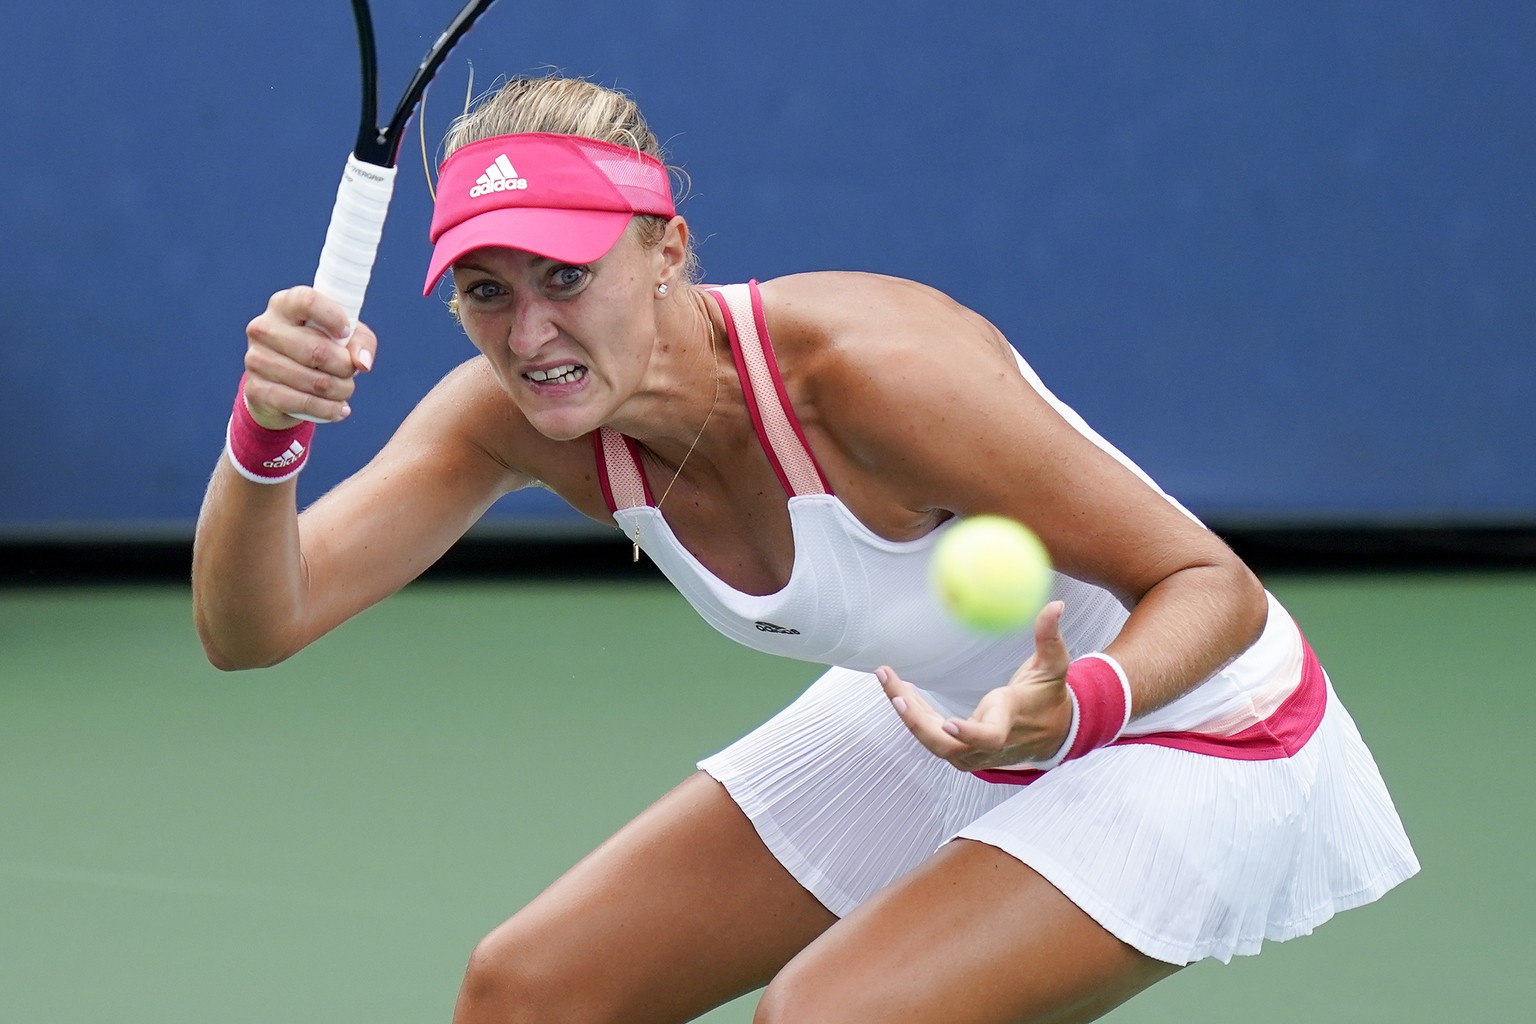 Kristina Mladenovic, of France, returns a shot to Varvara Gracheva, of Russia, during the second round of the US Open tennis championships, Wednesday, Sept. 2, 2020, in New York. (AP Photo/Seth Wenig)